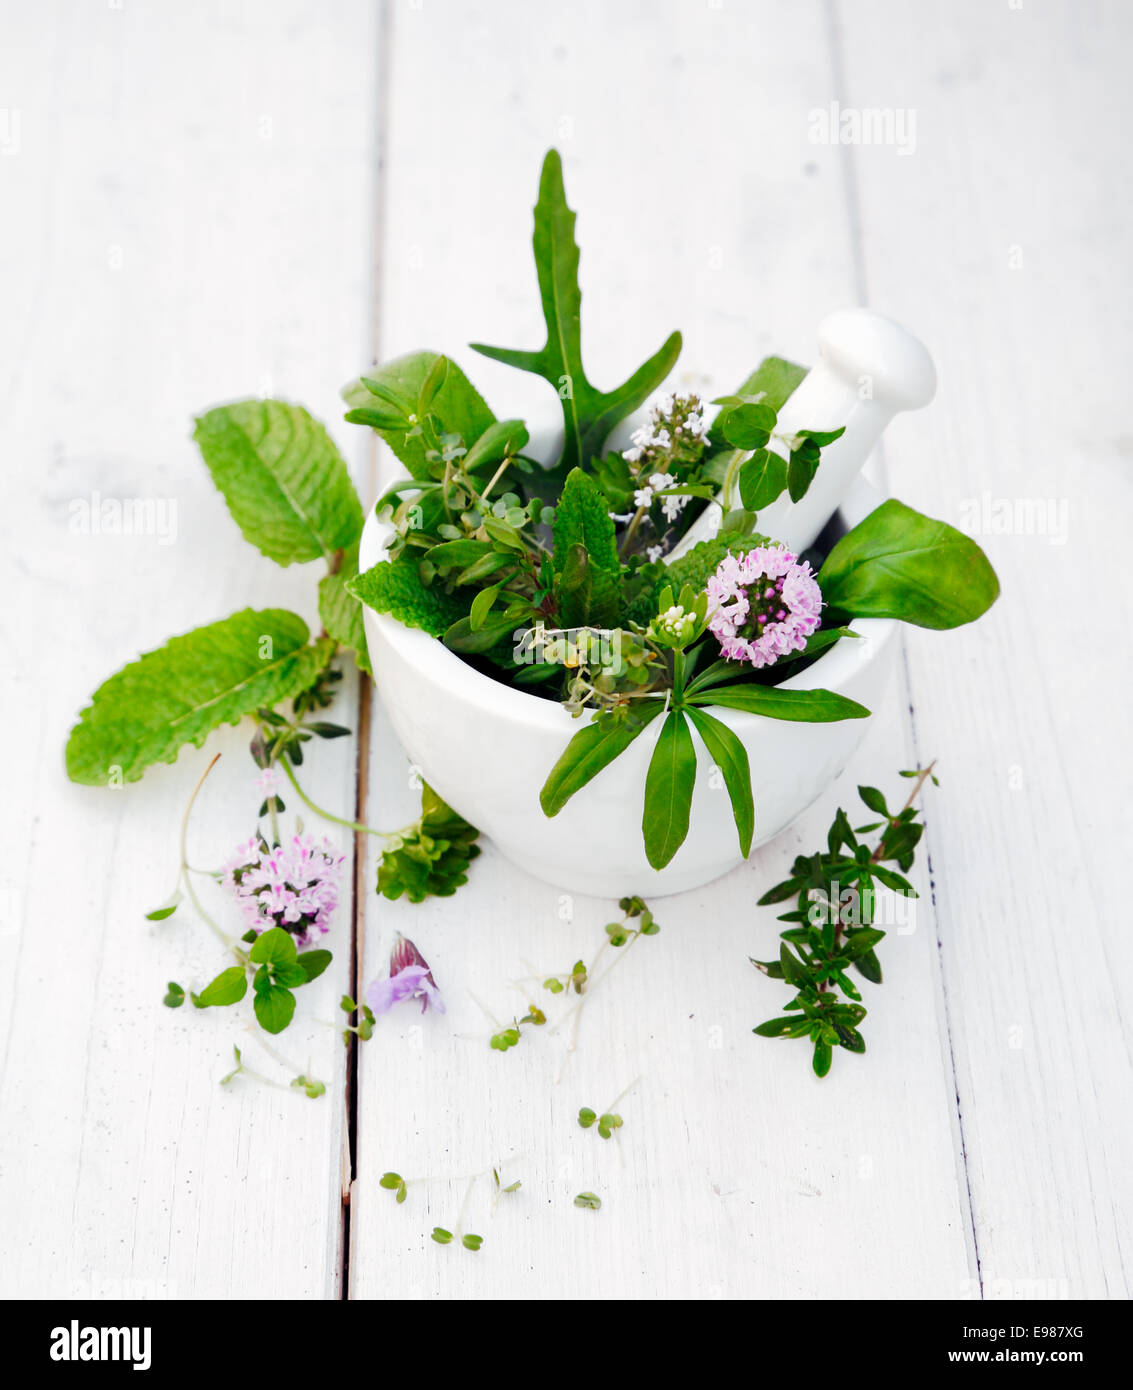 Flowering Assorted Herbs in a Mortar with pestle on white wooden background Stock Photo